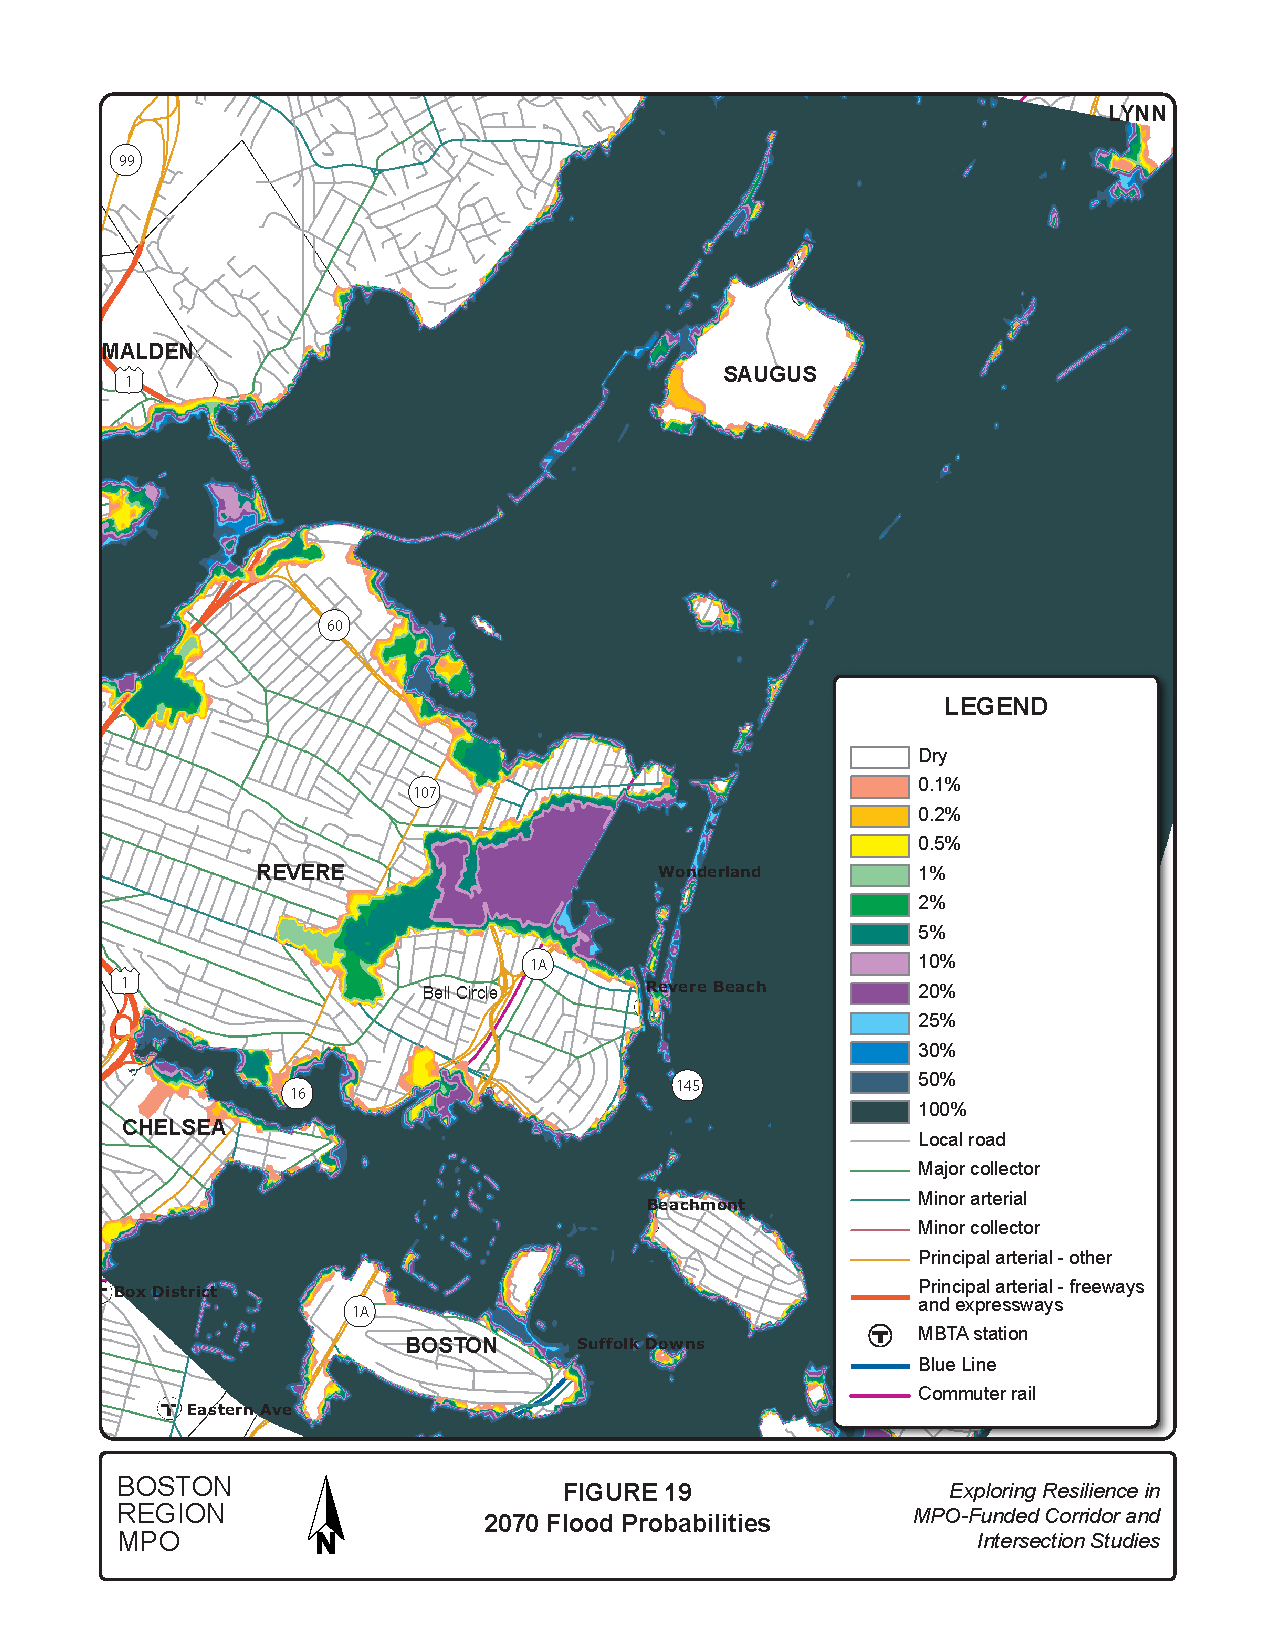 Figure 19 is a map of the study area showing the flood risk probabilities for 2070.